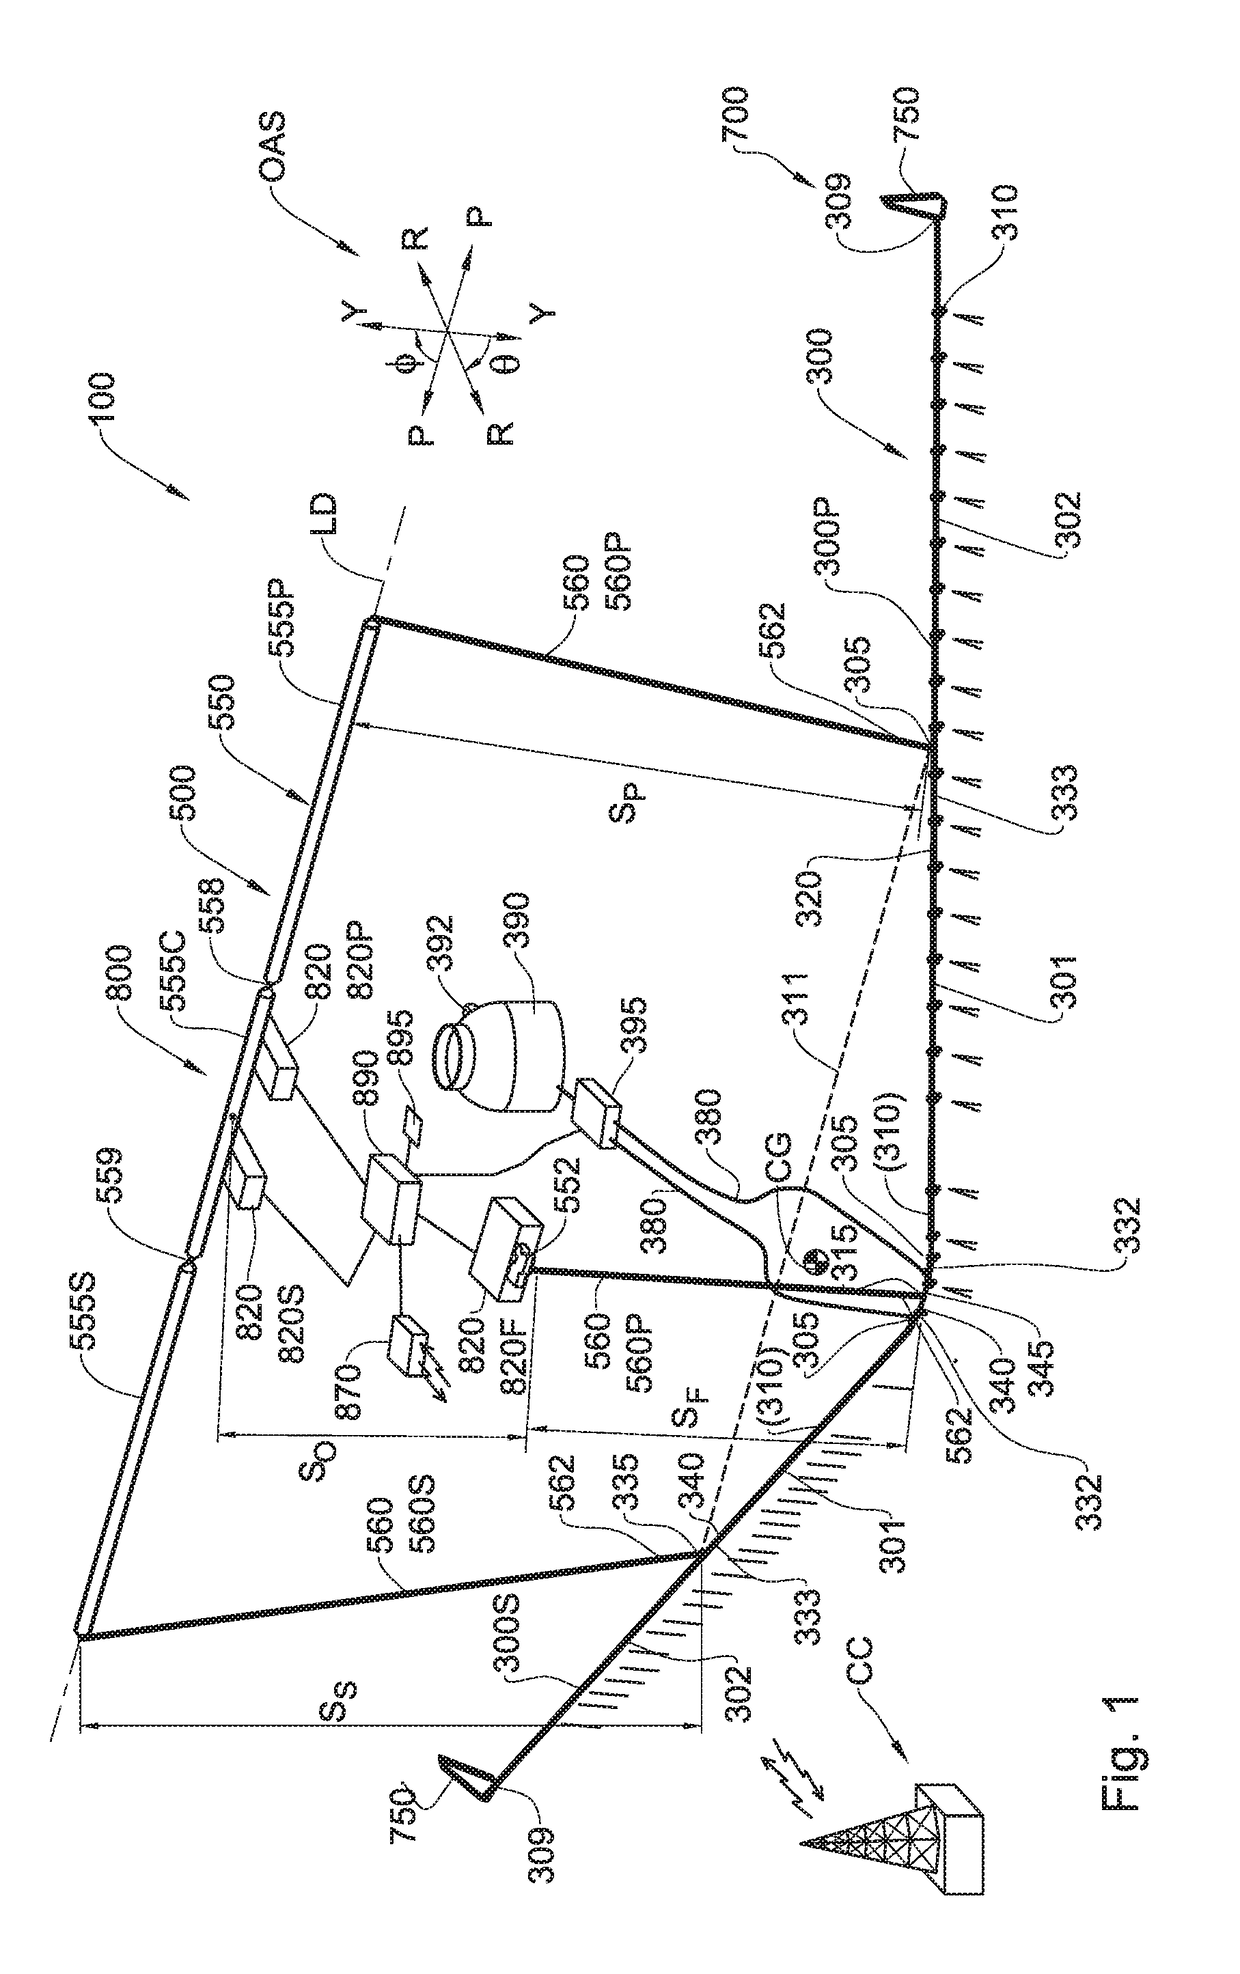 Aerial platforms for aerial spraying and methods for controlling the same